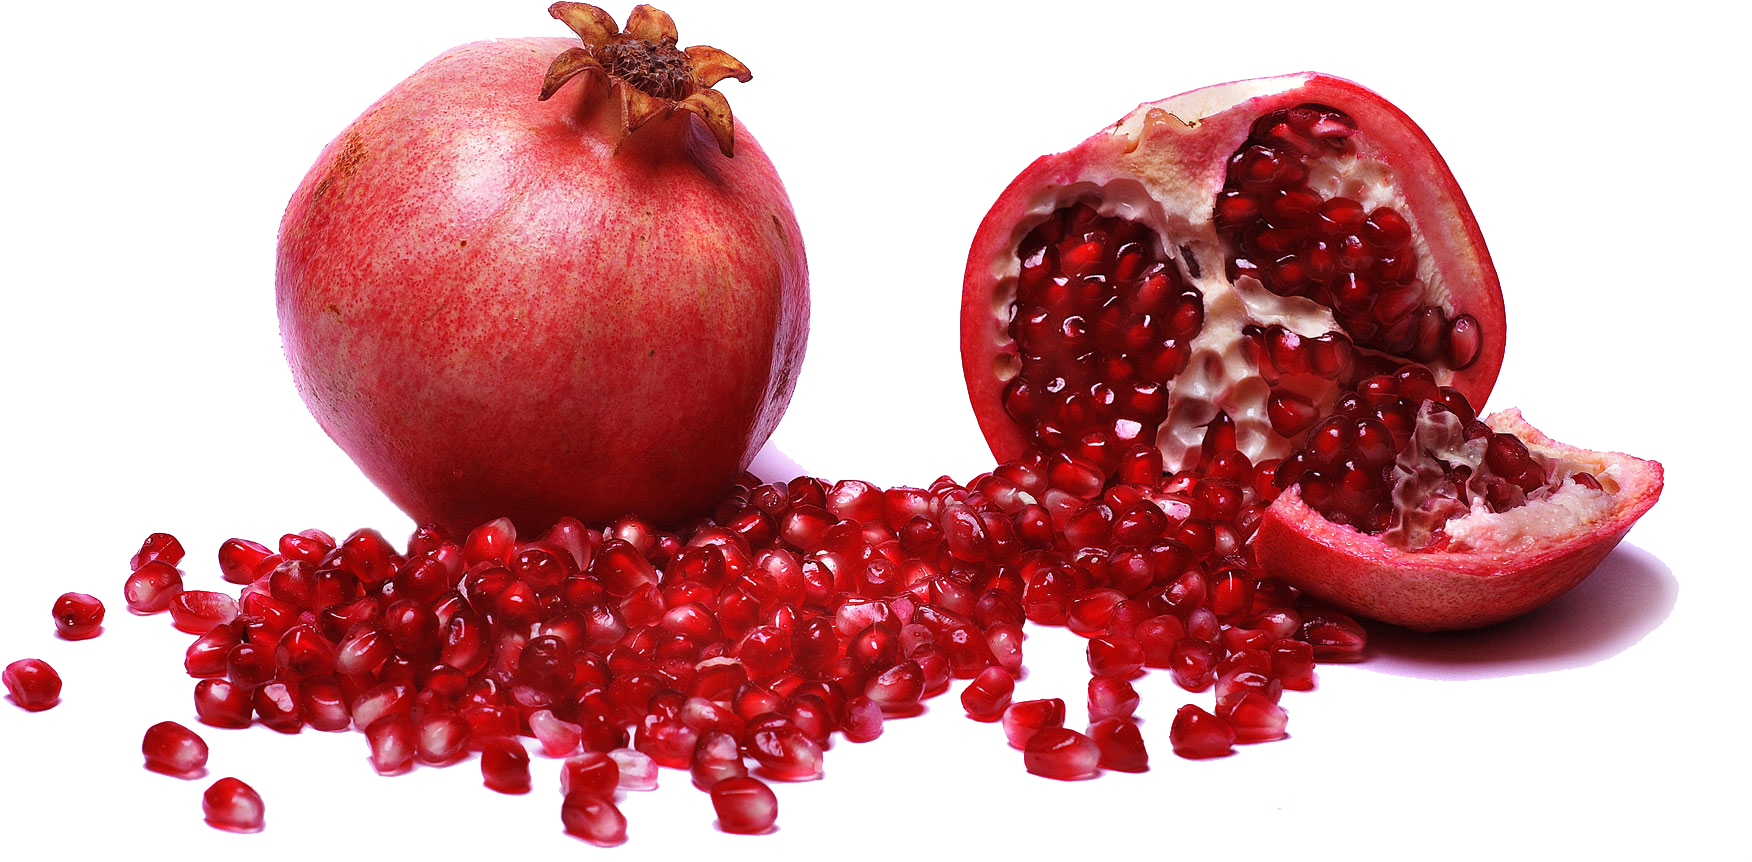 A Pomegranate And A Piece Of Fruit